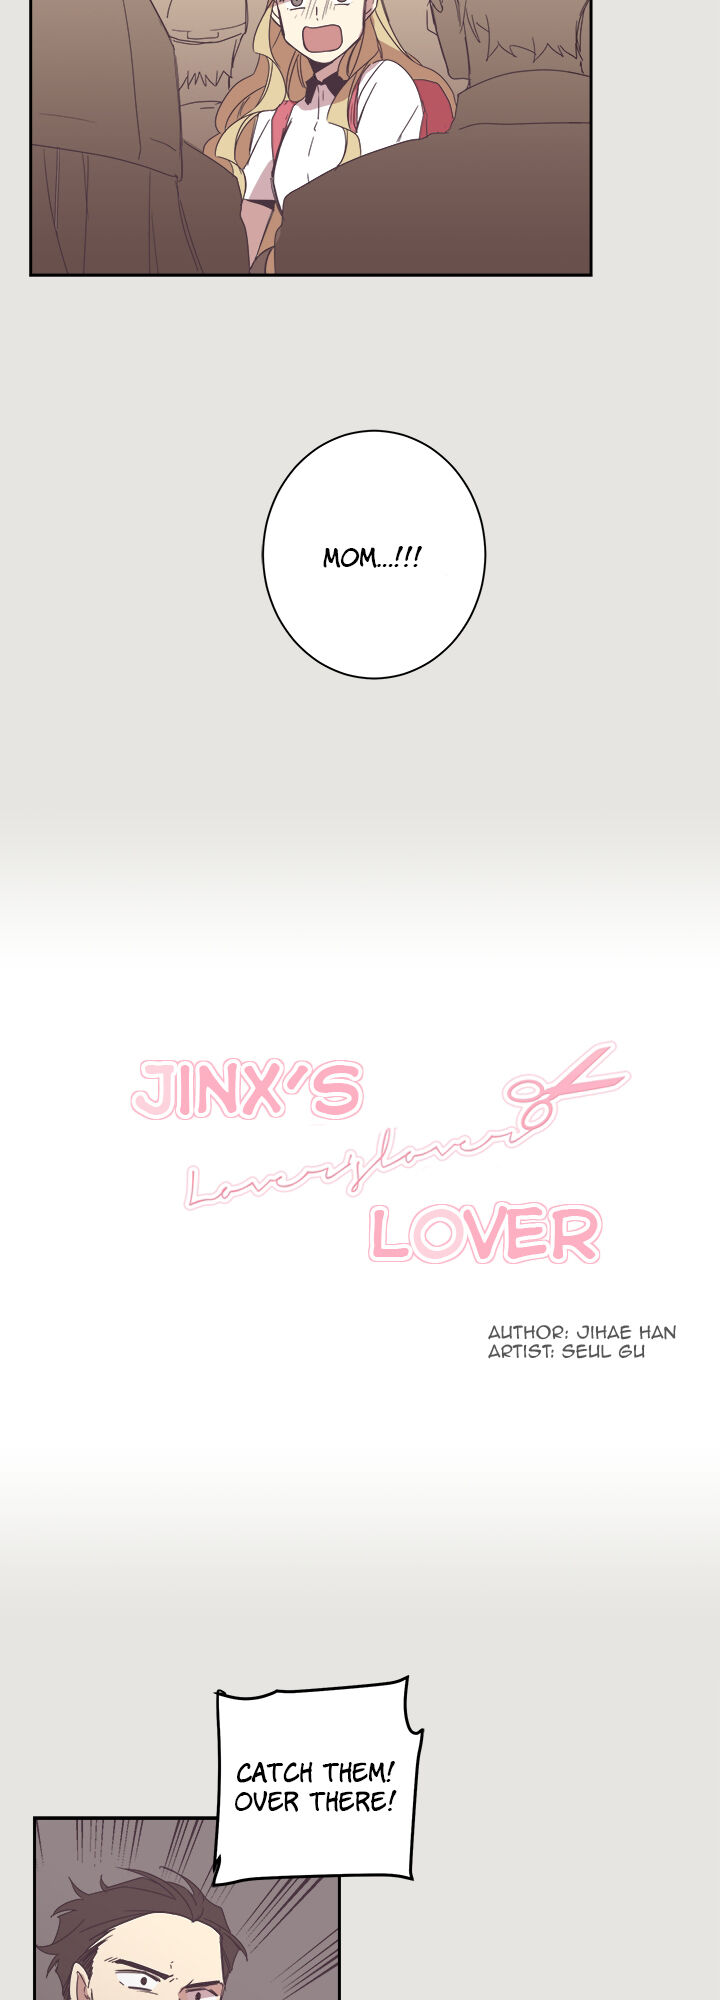 The Jinx's Lover 20